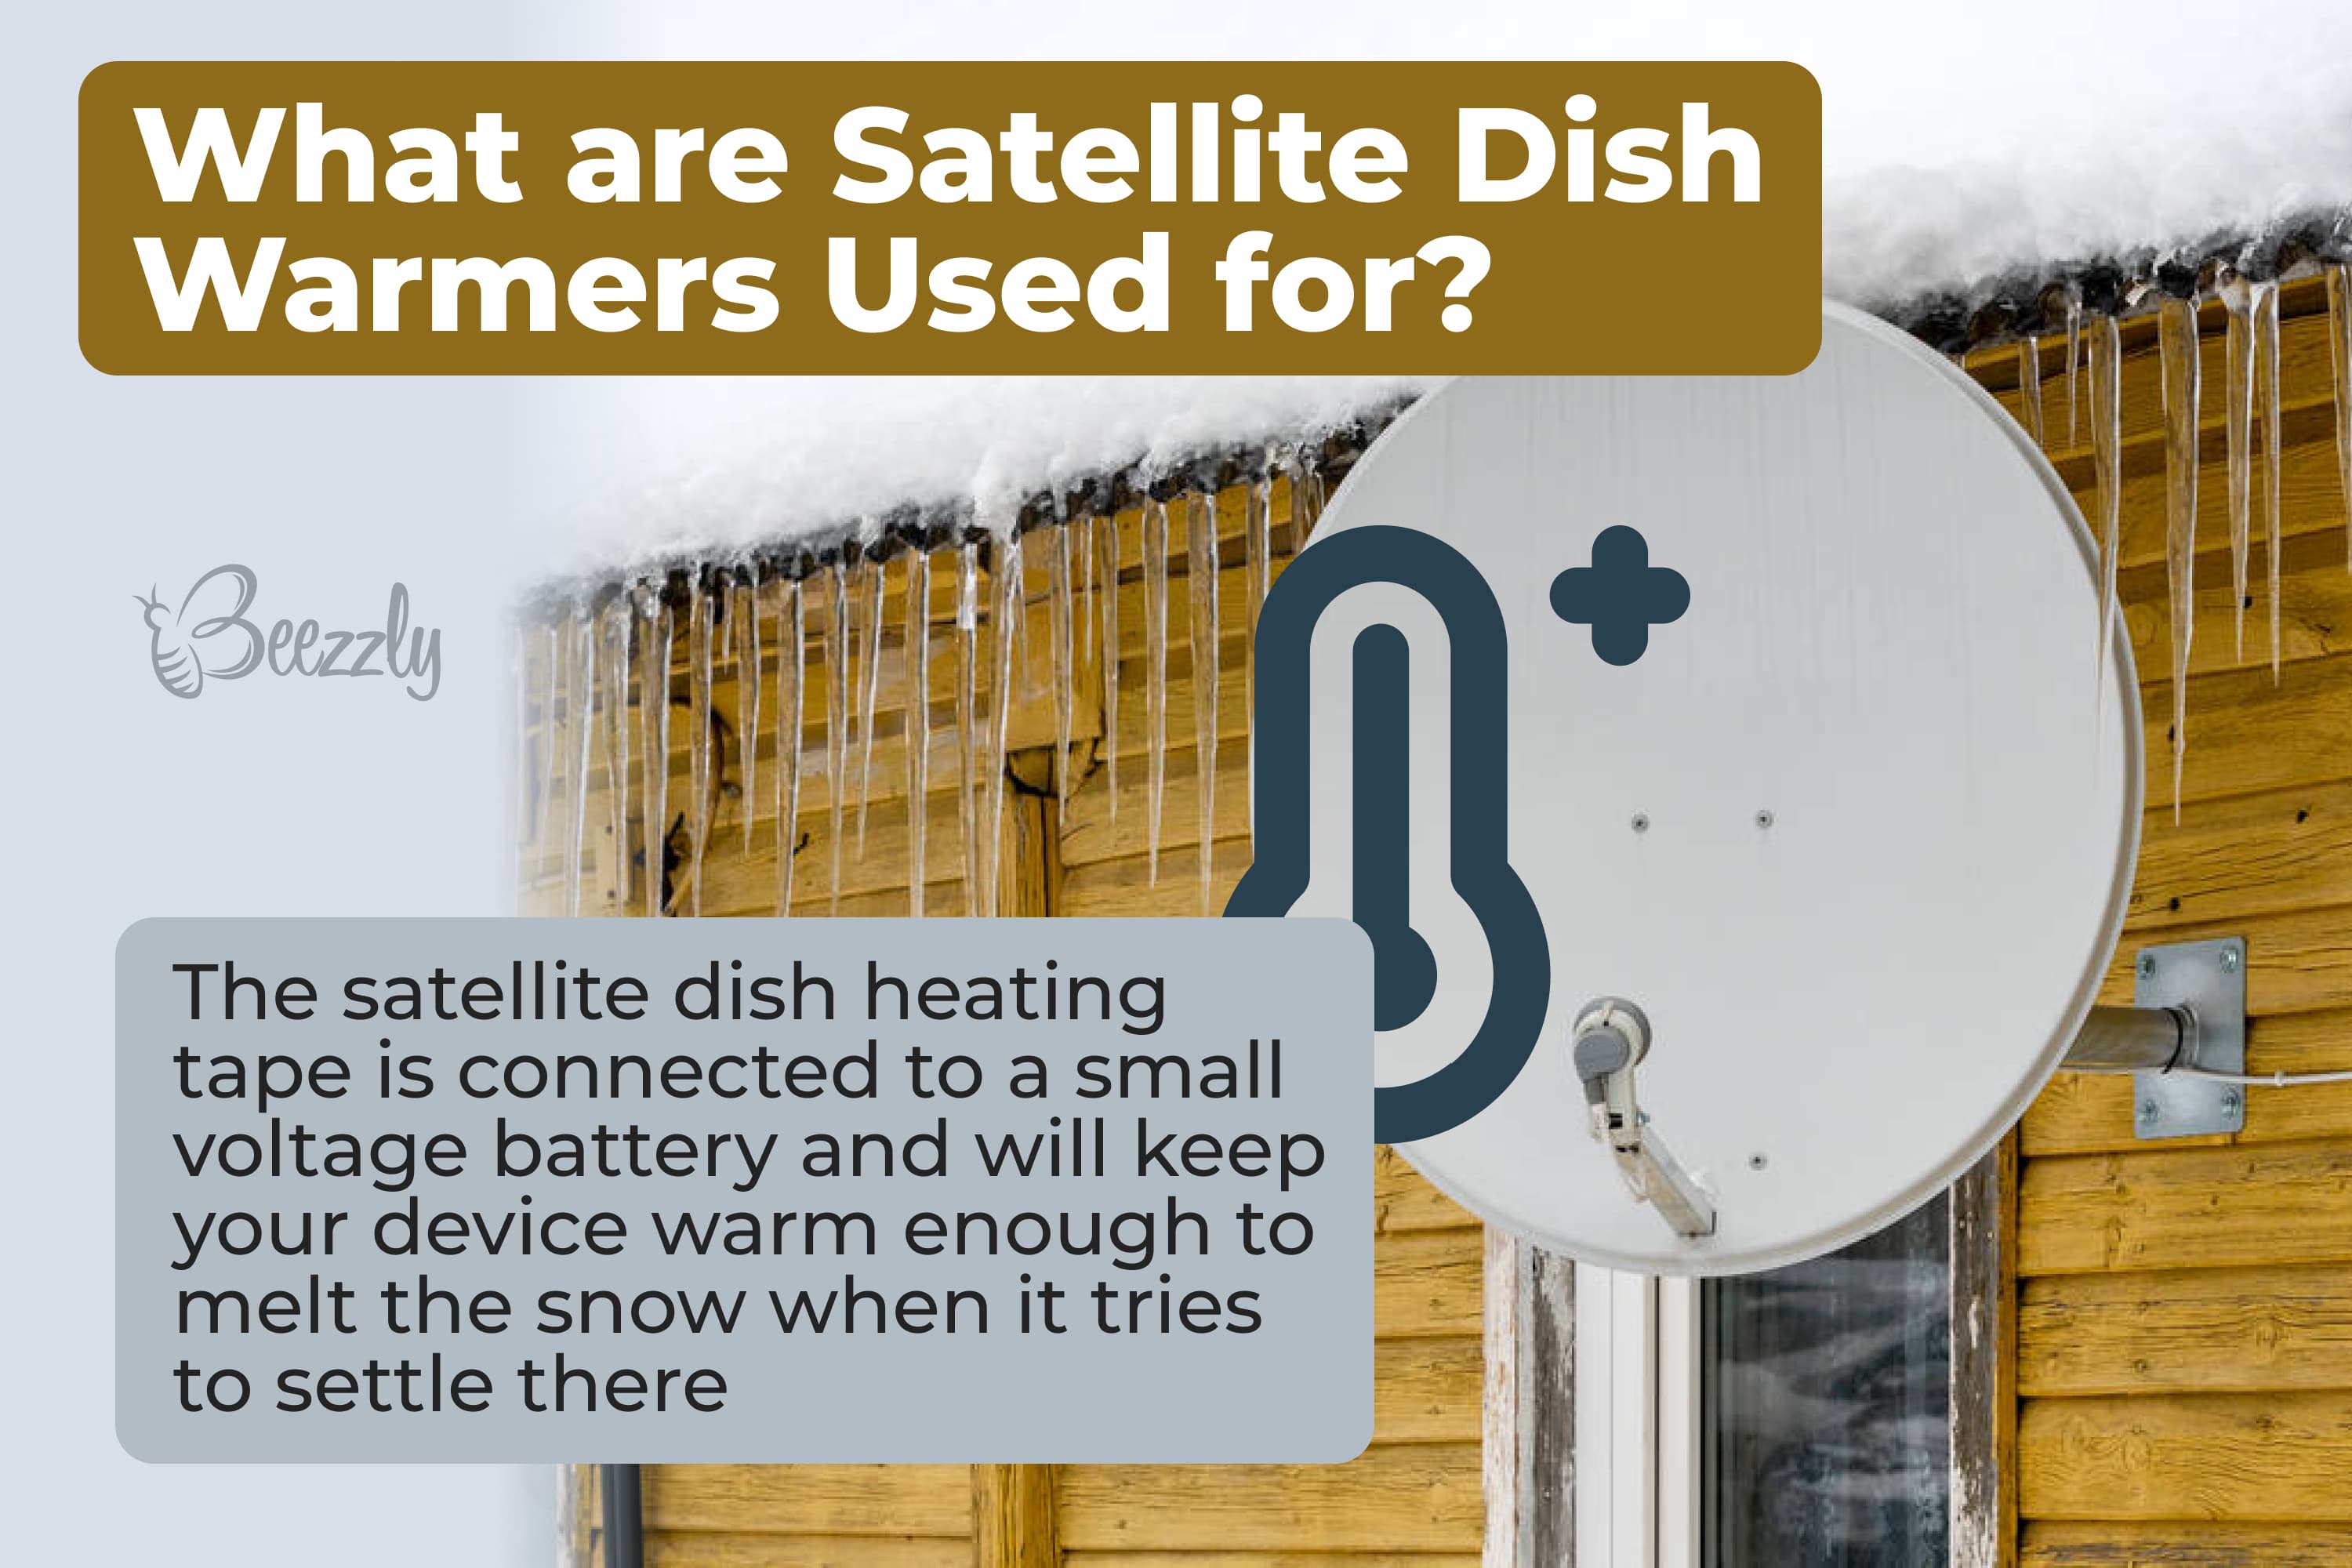 What are satellite dish warmers used for